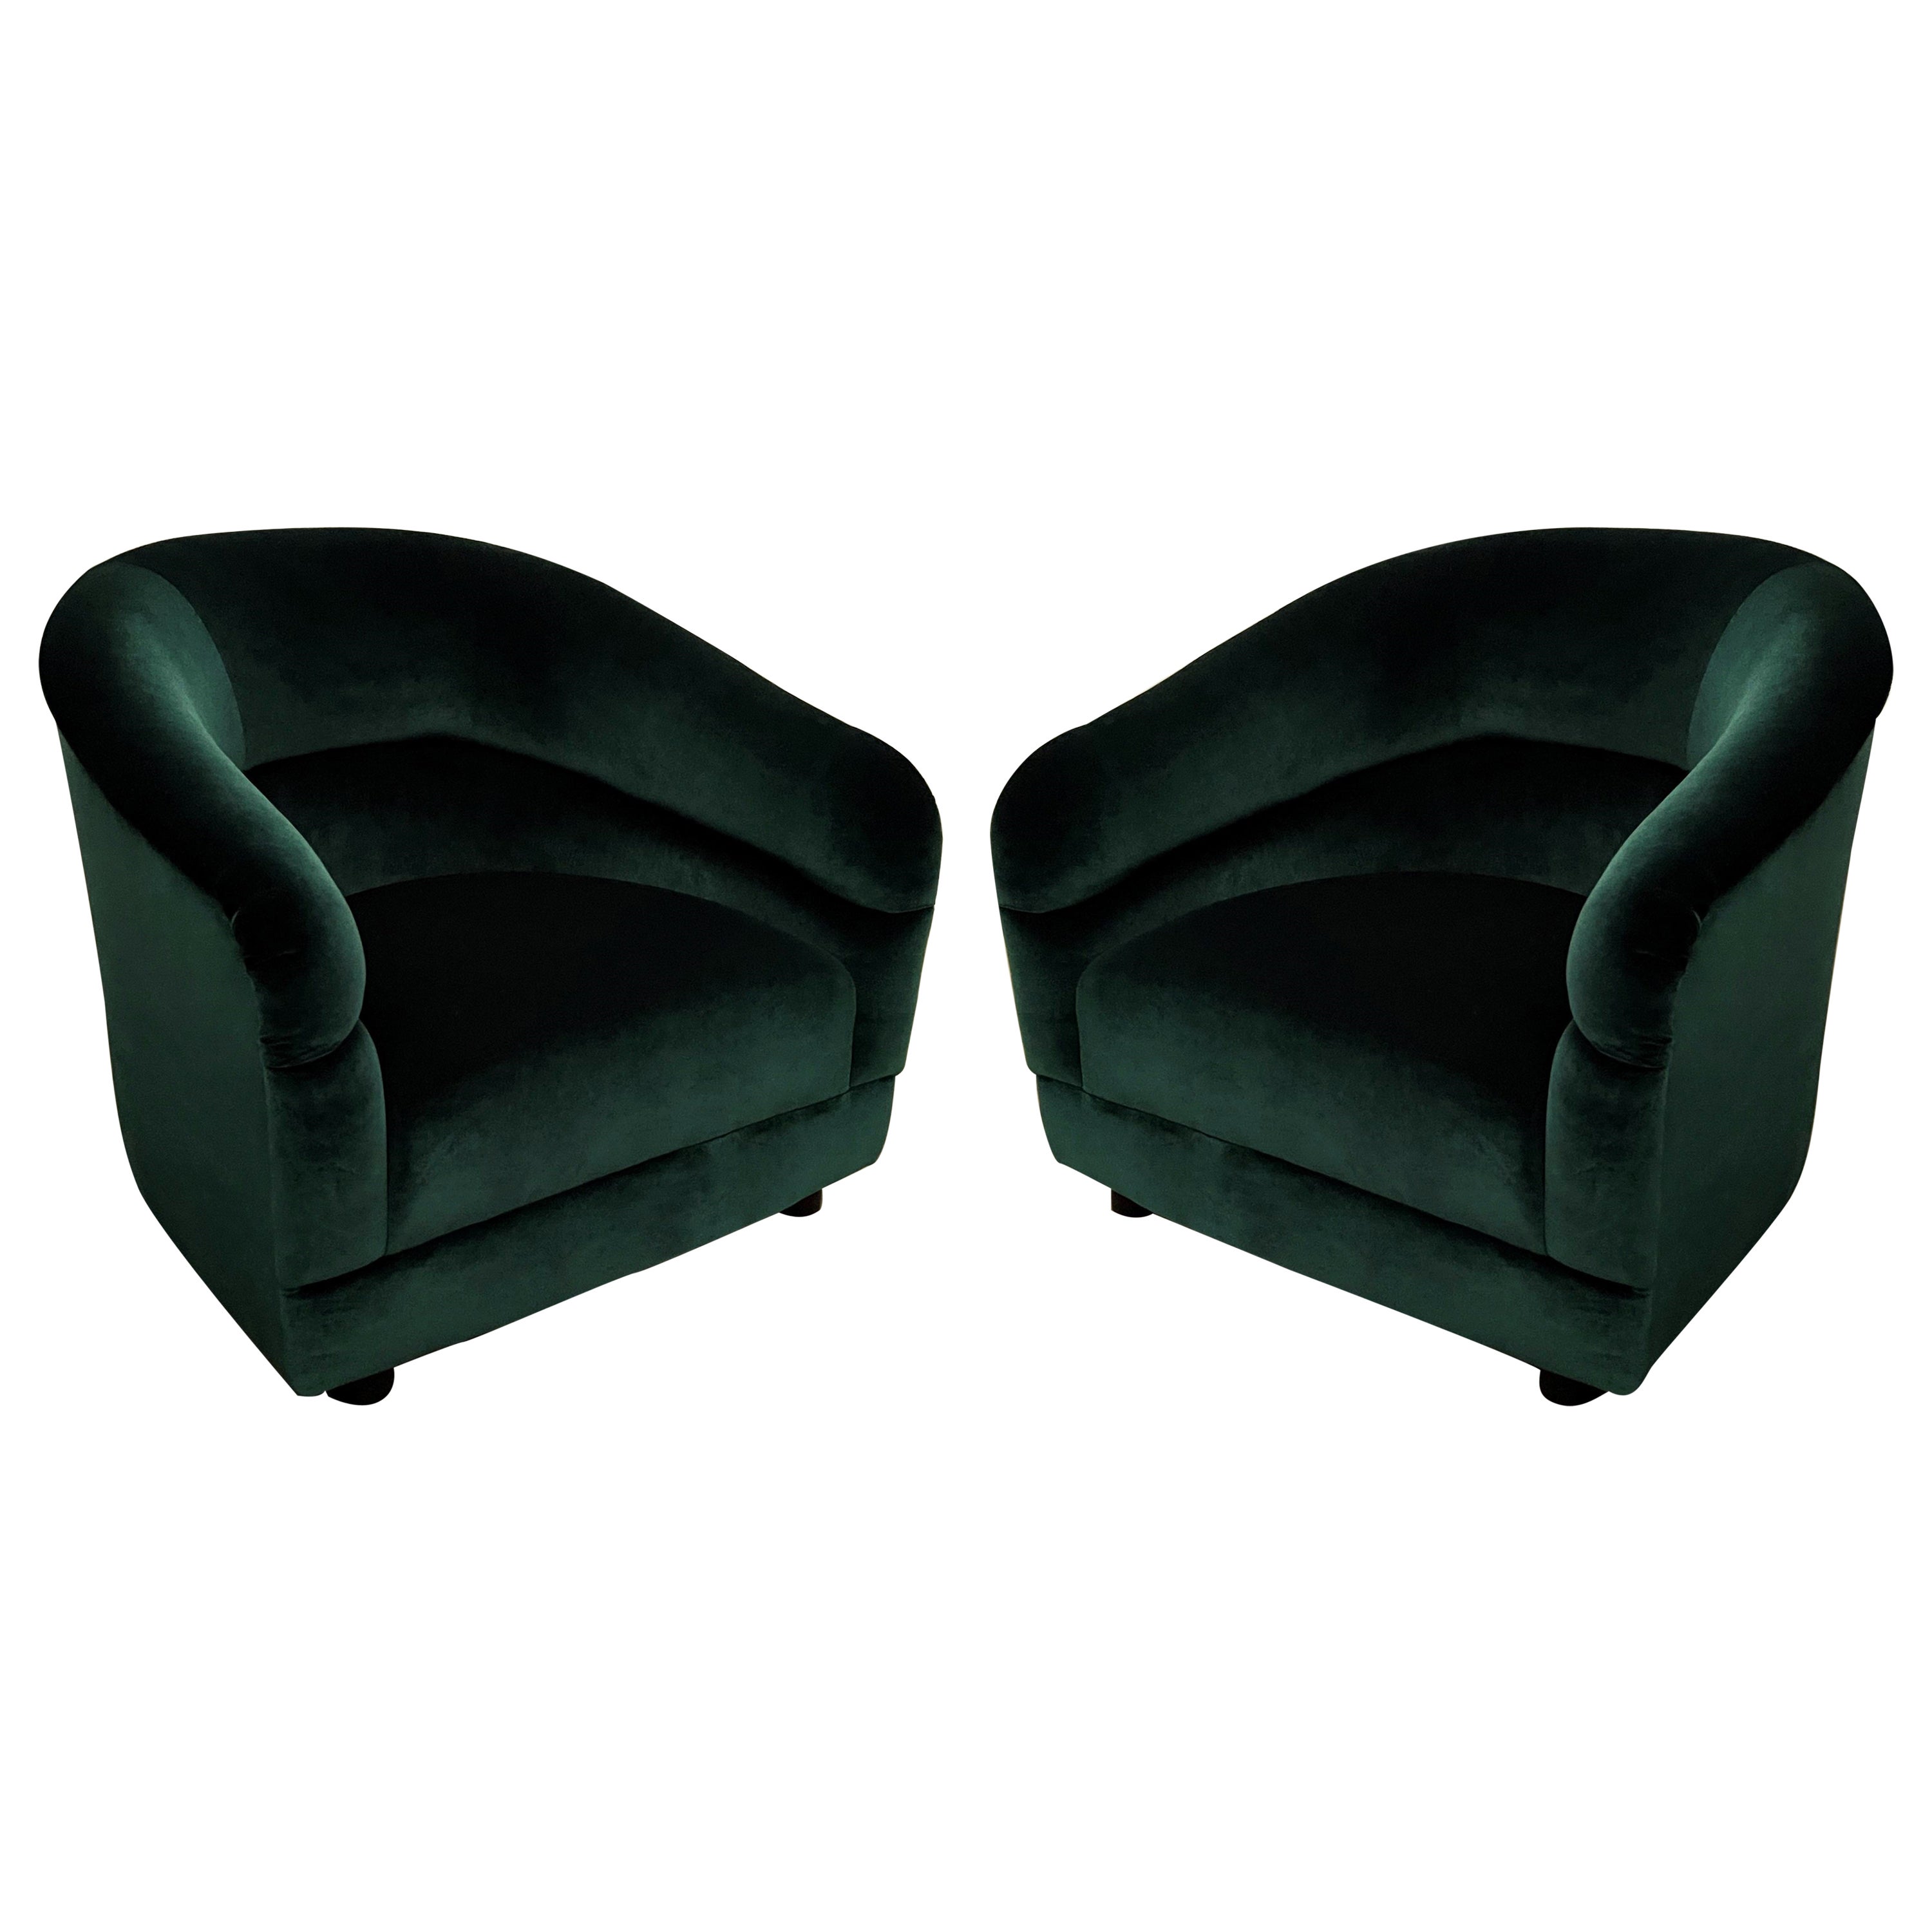 Pair of Mid-Century Modern Green Barrel Back Lounge Chairs